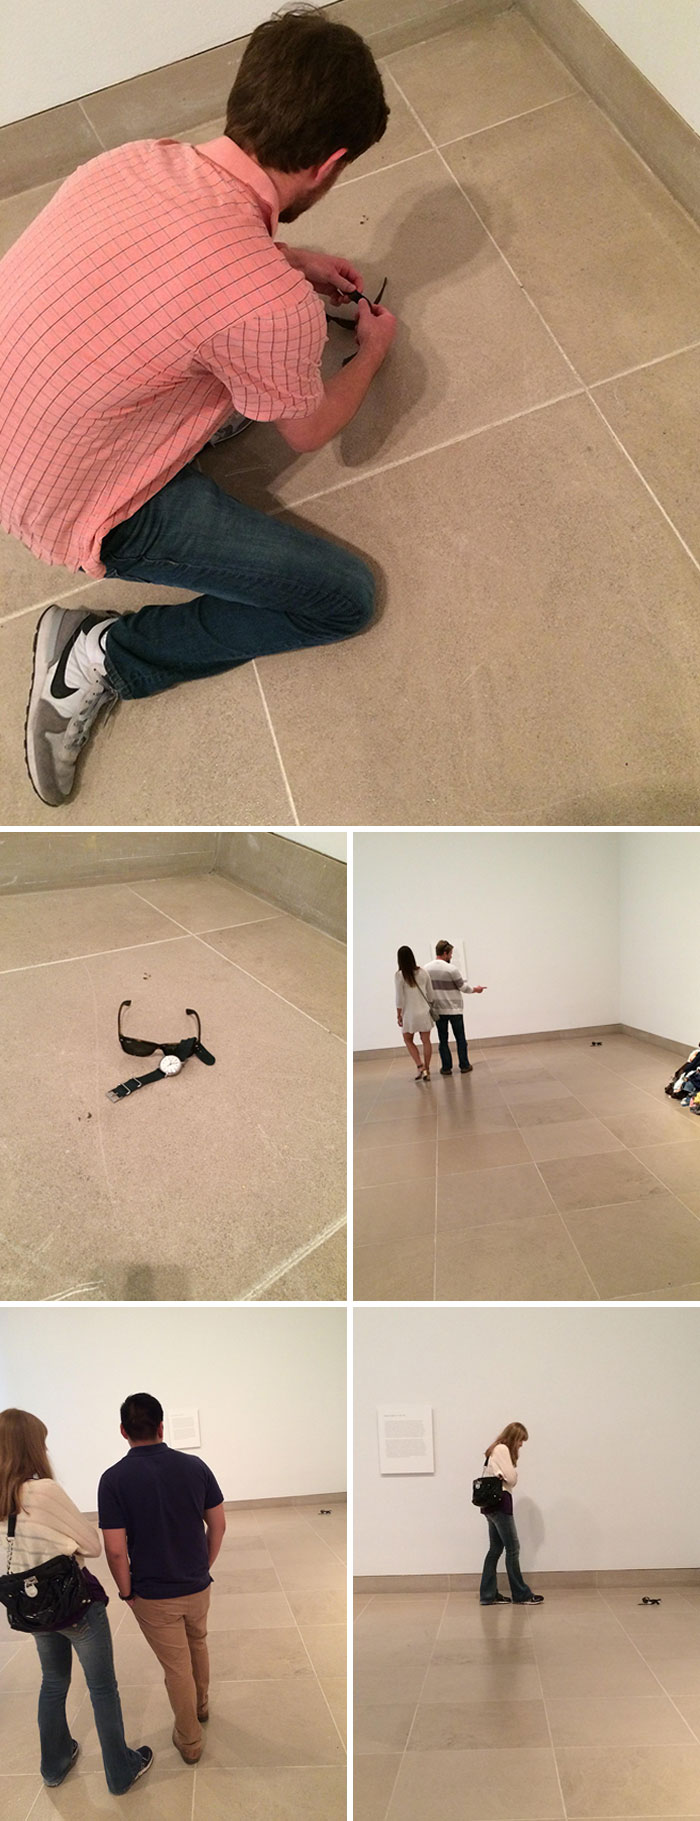 My Friend And I Set His Watch And Sunglasses Down In An Abstract Art Exhibit At The DMA